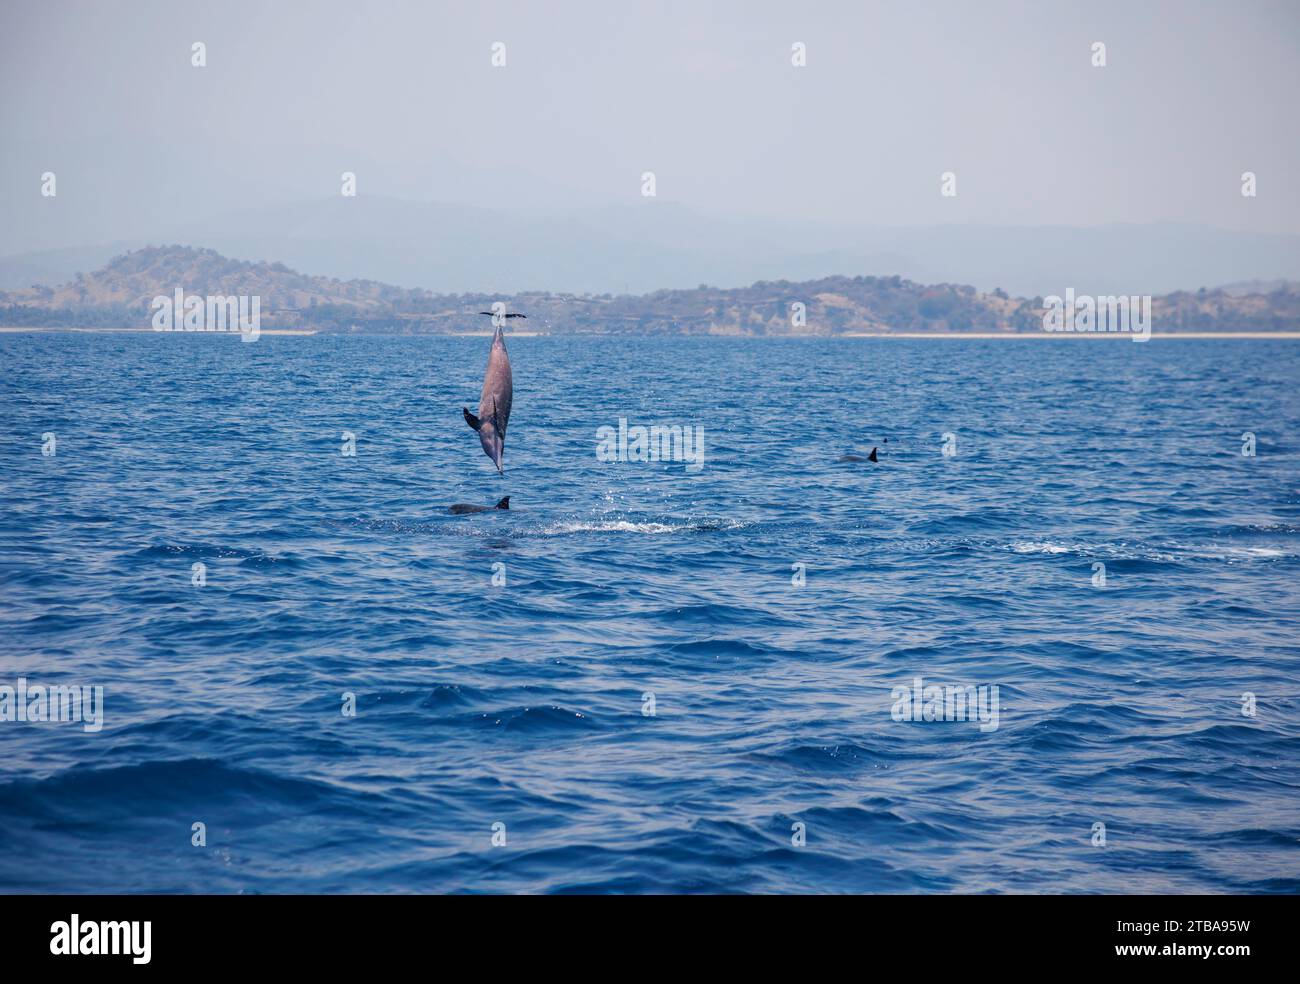 Spinner dolphin, Stenella longirostris, leaps and spins into the air off The Democratic Republic of Timor-Leste. Stock Photo